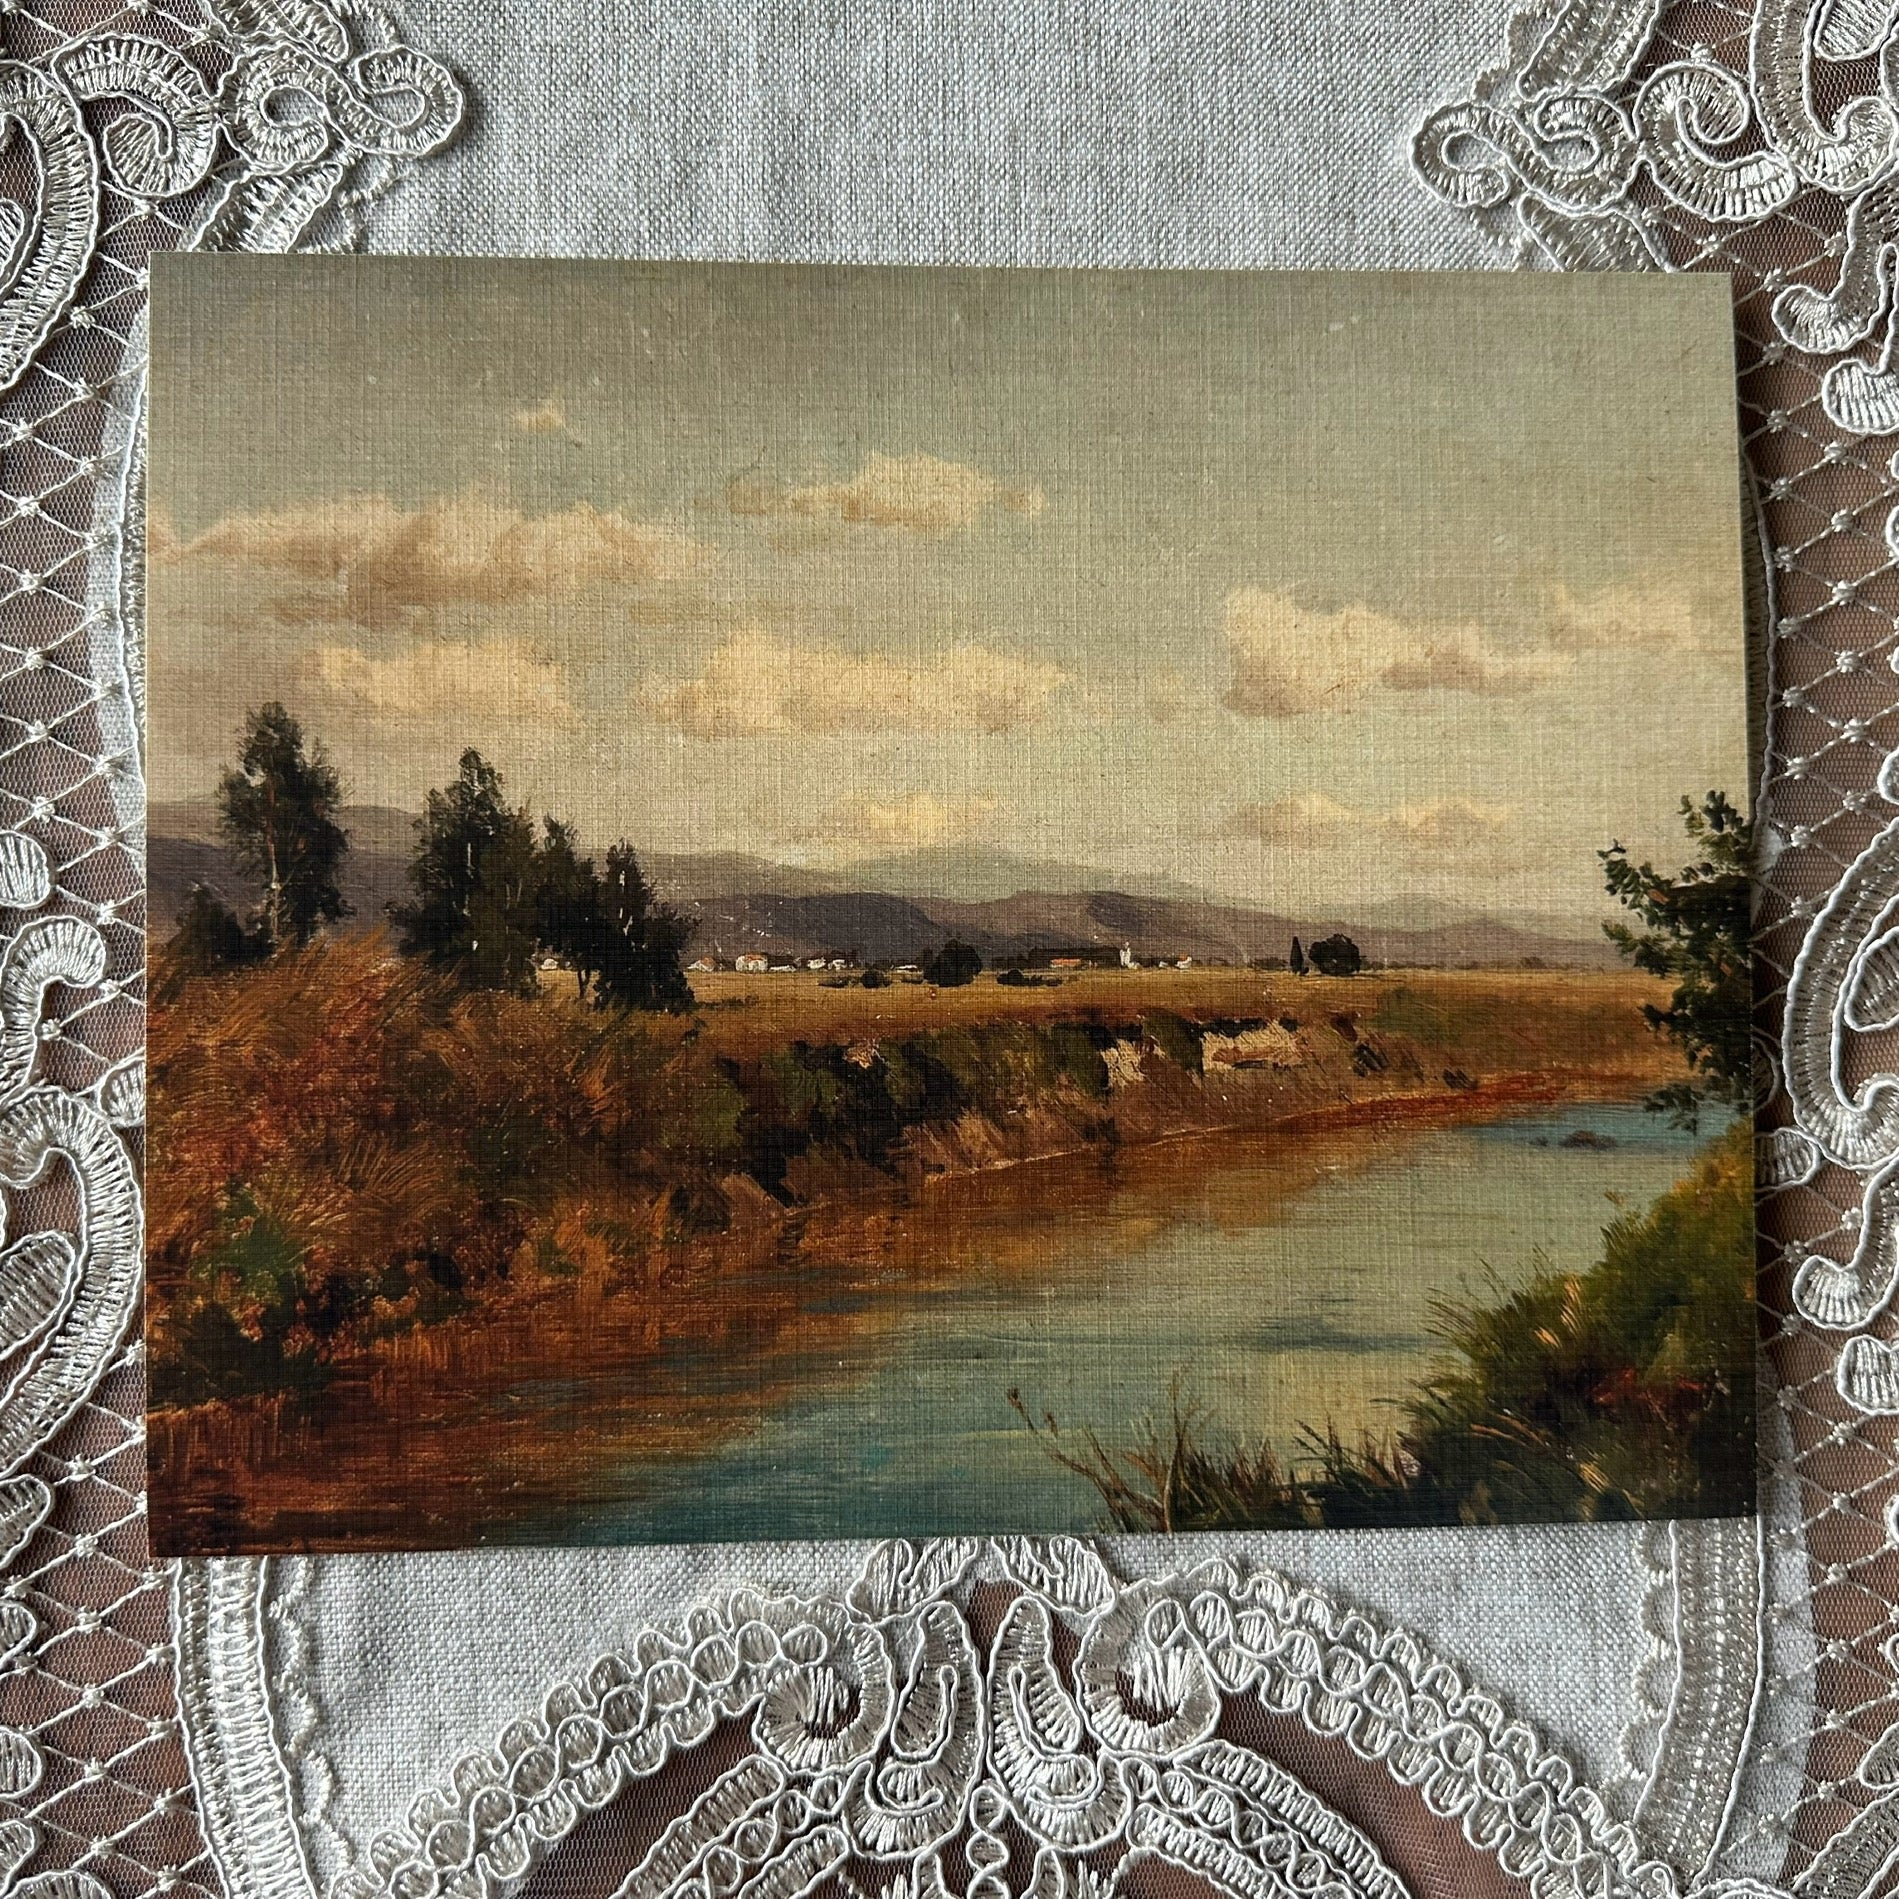 Landscape With a Stream  Nat Rone Designs   